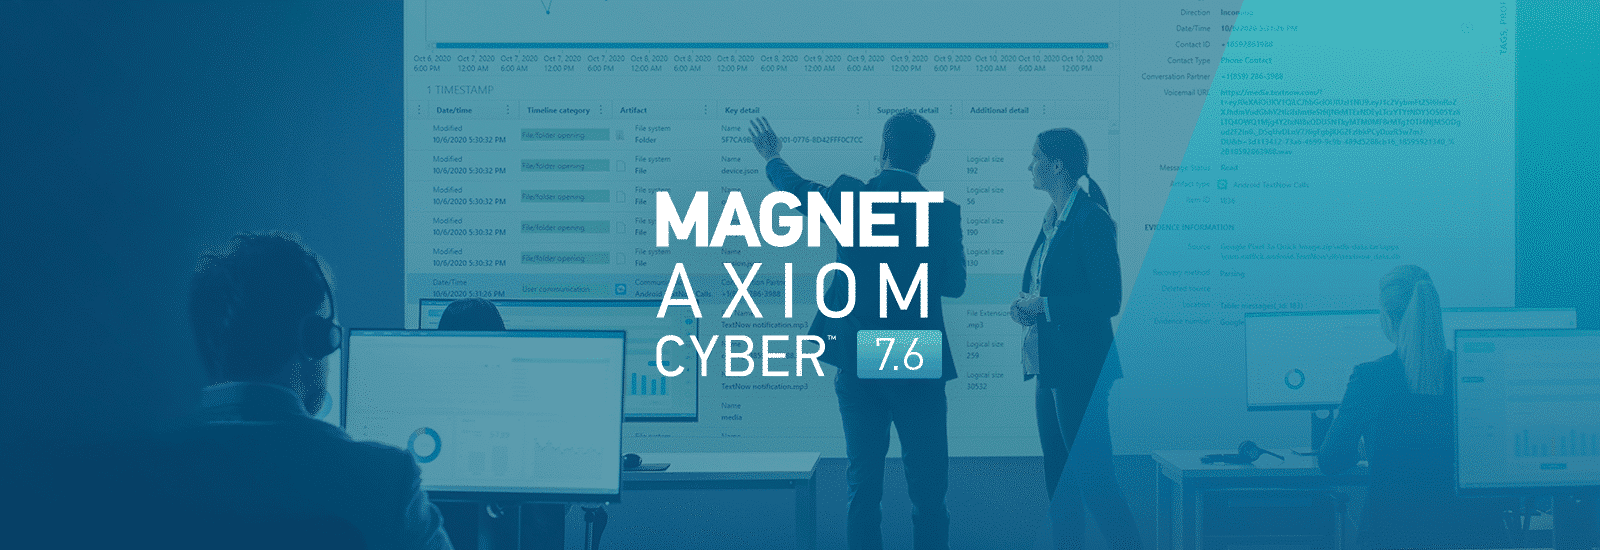 A decorative header for the Magnet AXIOM Cyber 7.6 release blog